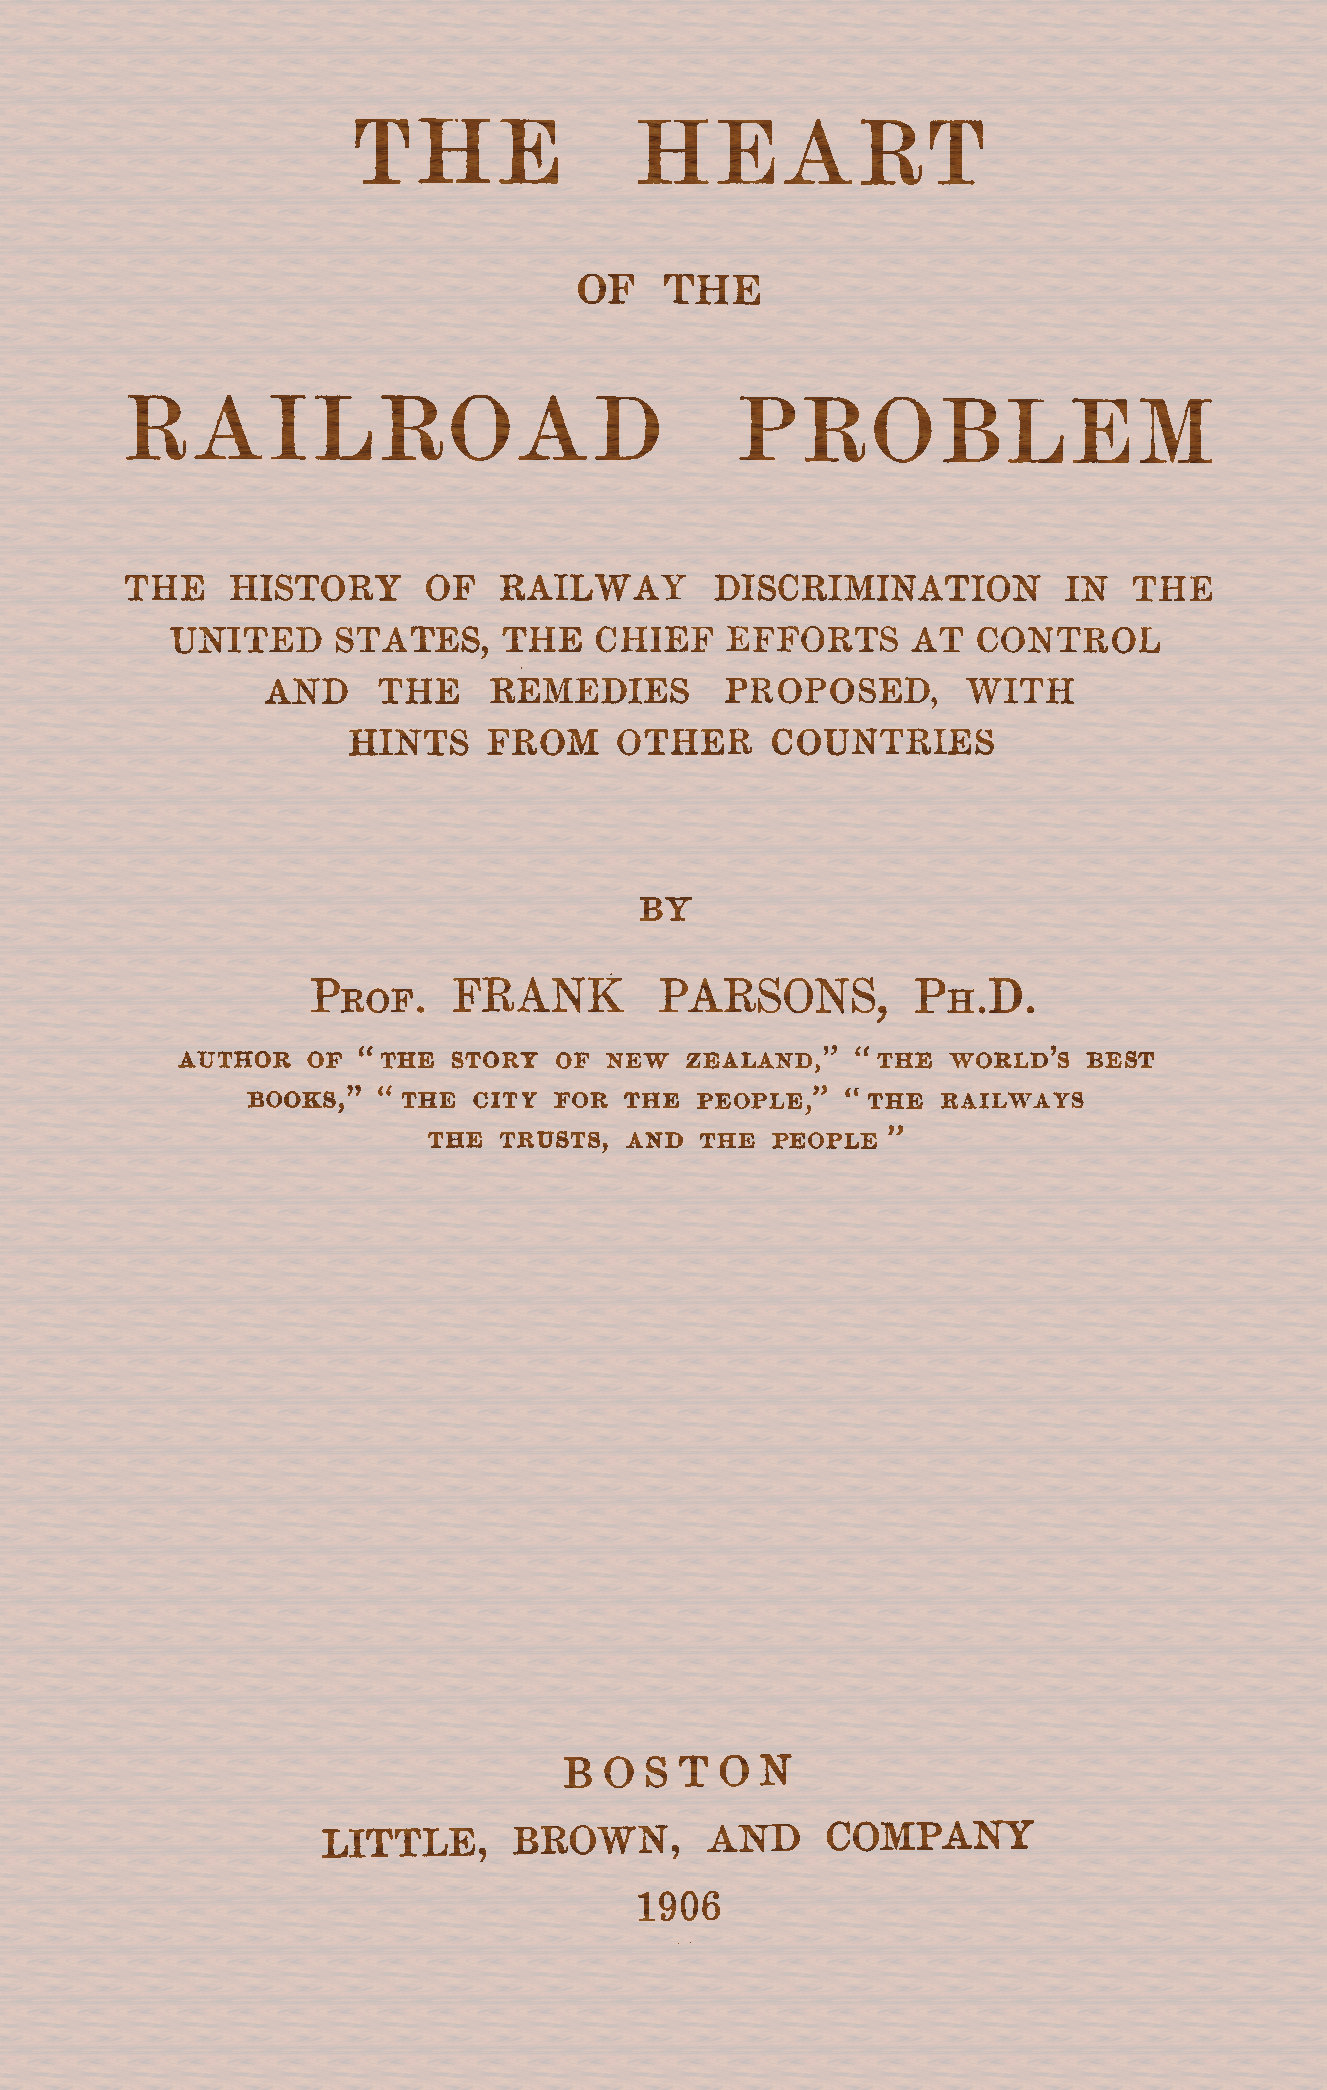 The heart of the railroad problem&#10;The history of railway discrimination in the United States, the chief efforts at control and the remedies proposed, with hints from other countries